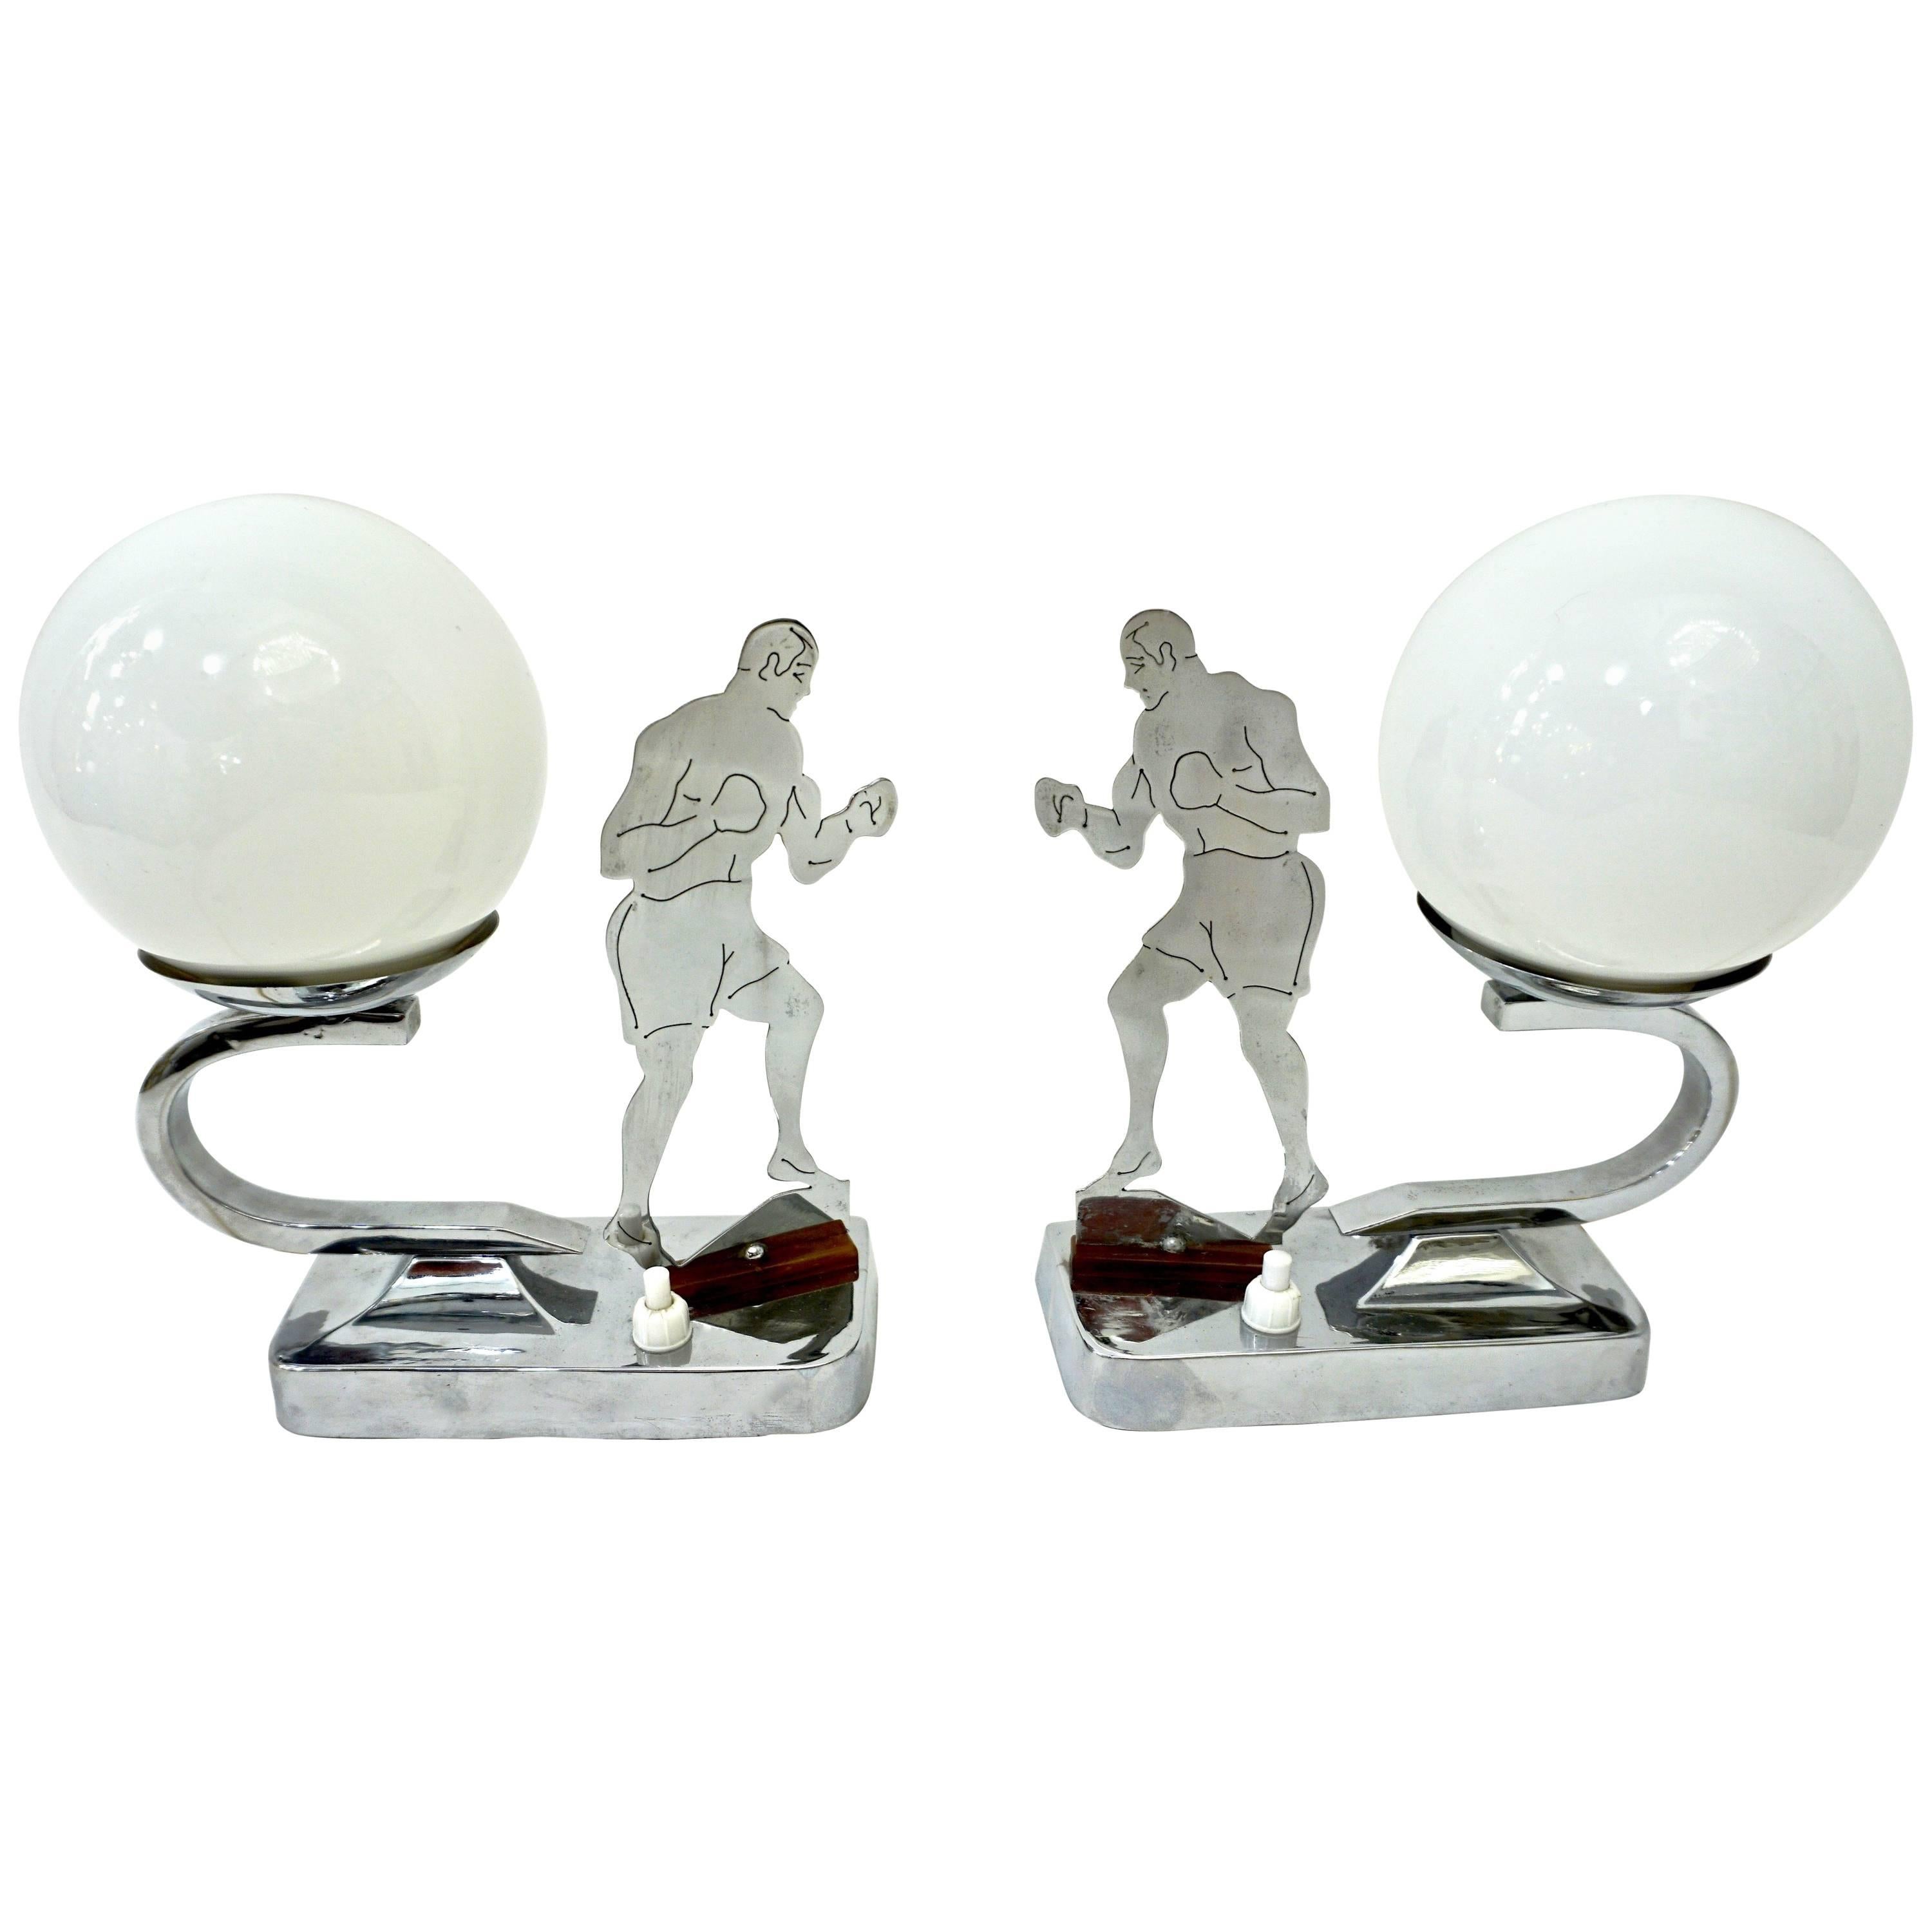 Art Deco English Nickel Pair of Boxer Table / Desk Lamps with White Glass Globes